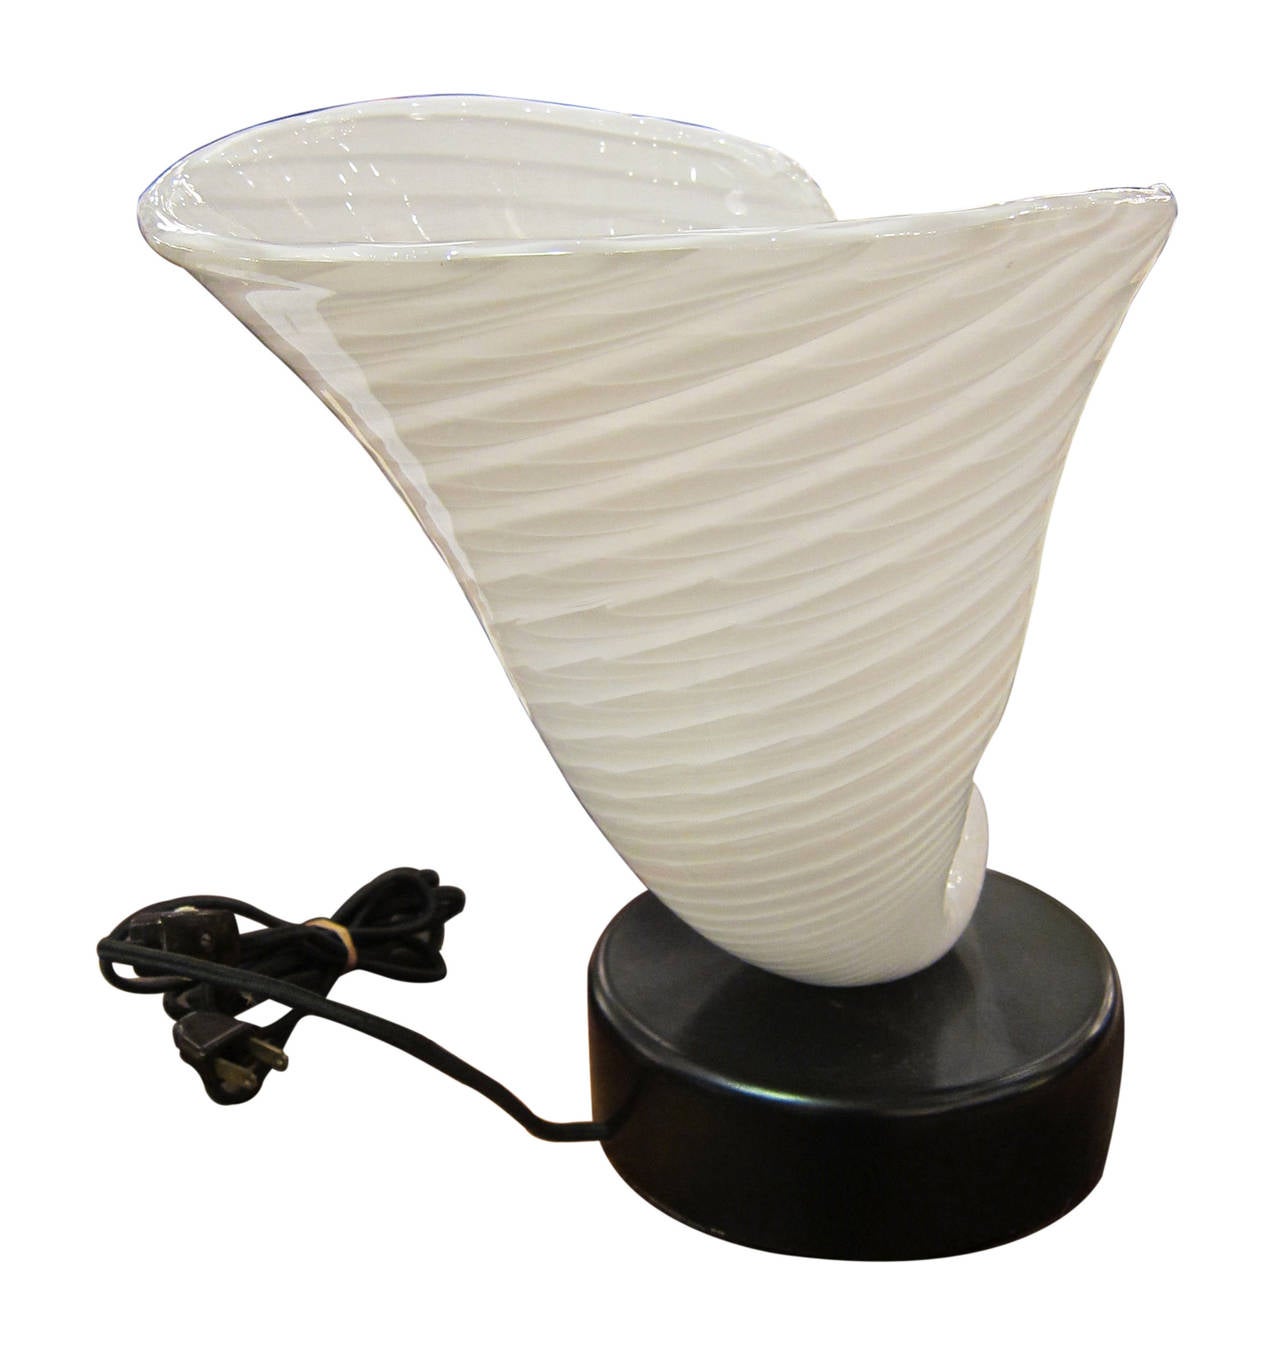 1970s single Murano white handblown glass Mid-Century Modern table lamp. This can be seen at our 400 Gilligan St location in Scranton, PA.